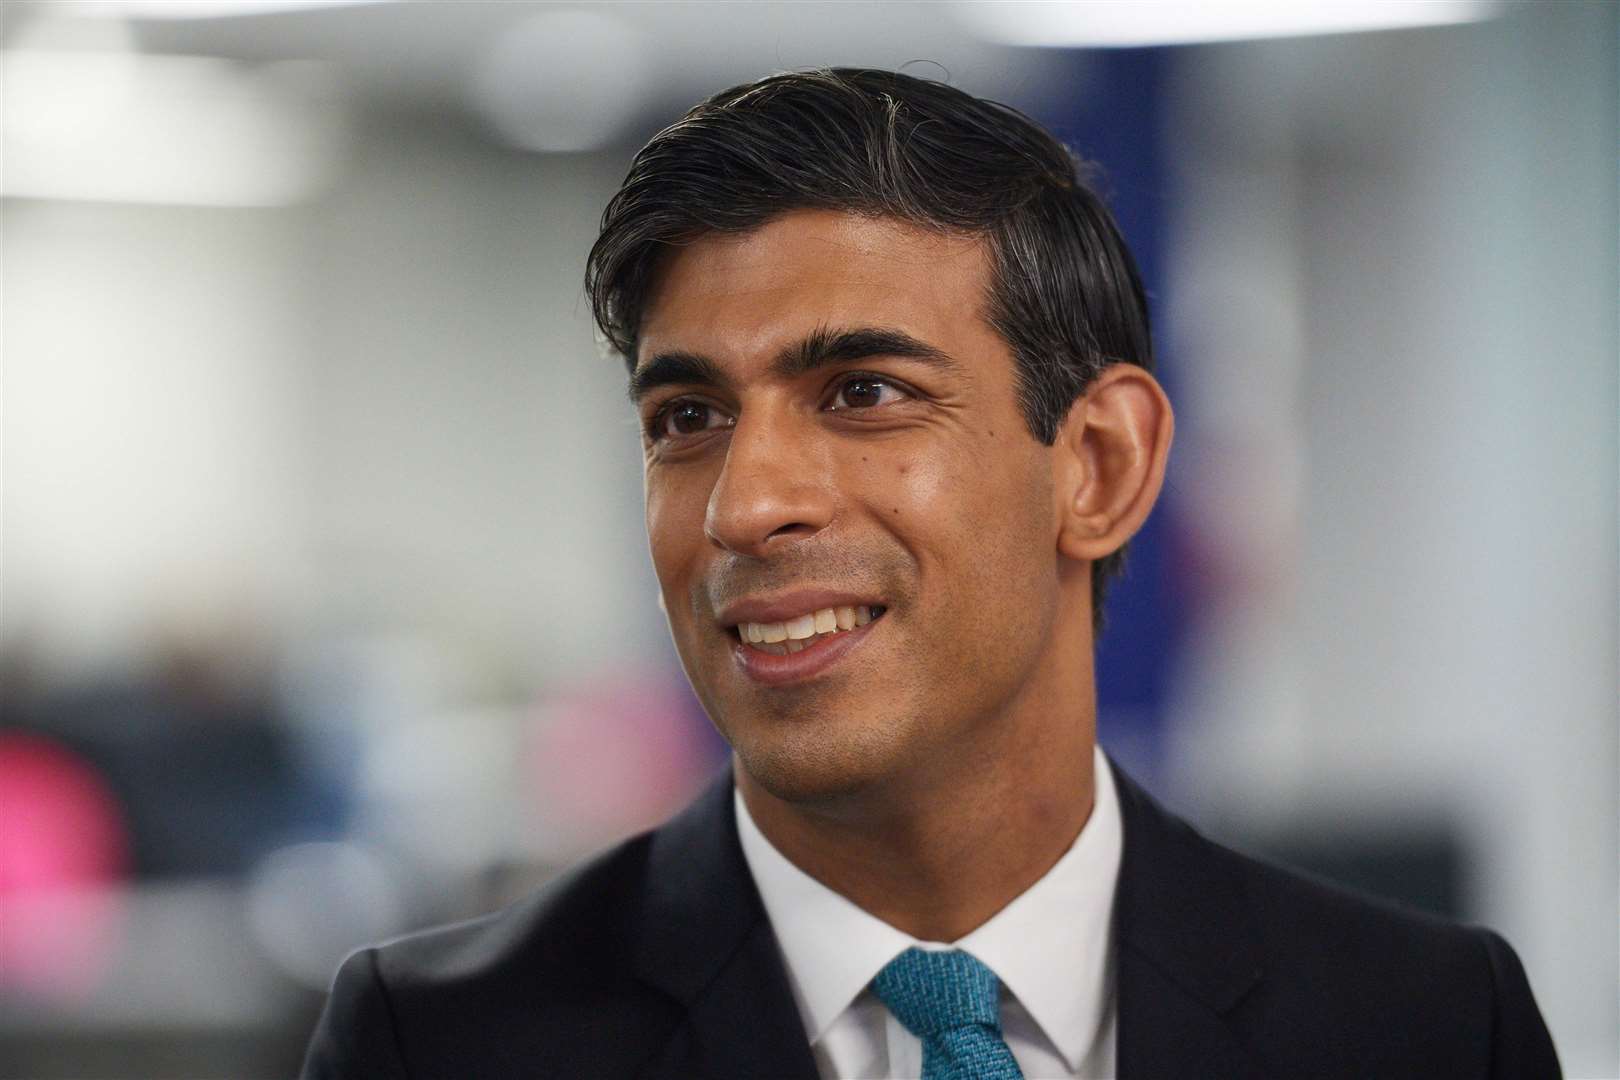 Britain's Chancellor of the Exchequer Rishi Sunak speaks to a member of staff during his visit to the headquarters of energy supplier Octopus Energy in London on October 05, 2020. - The visit coincides with the company's plan to create 1,000 new technology jobs across sites in England. (Photo by Leon Neal / POOL / AFP) (Photo by LEON NEAL/POOL/AFP via Getty Images)